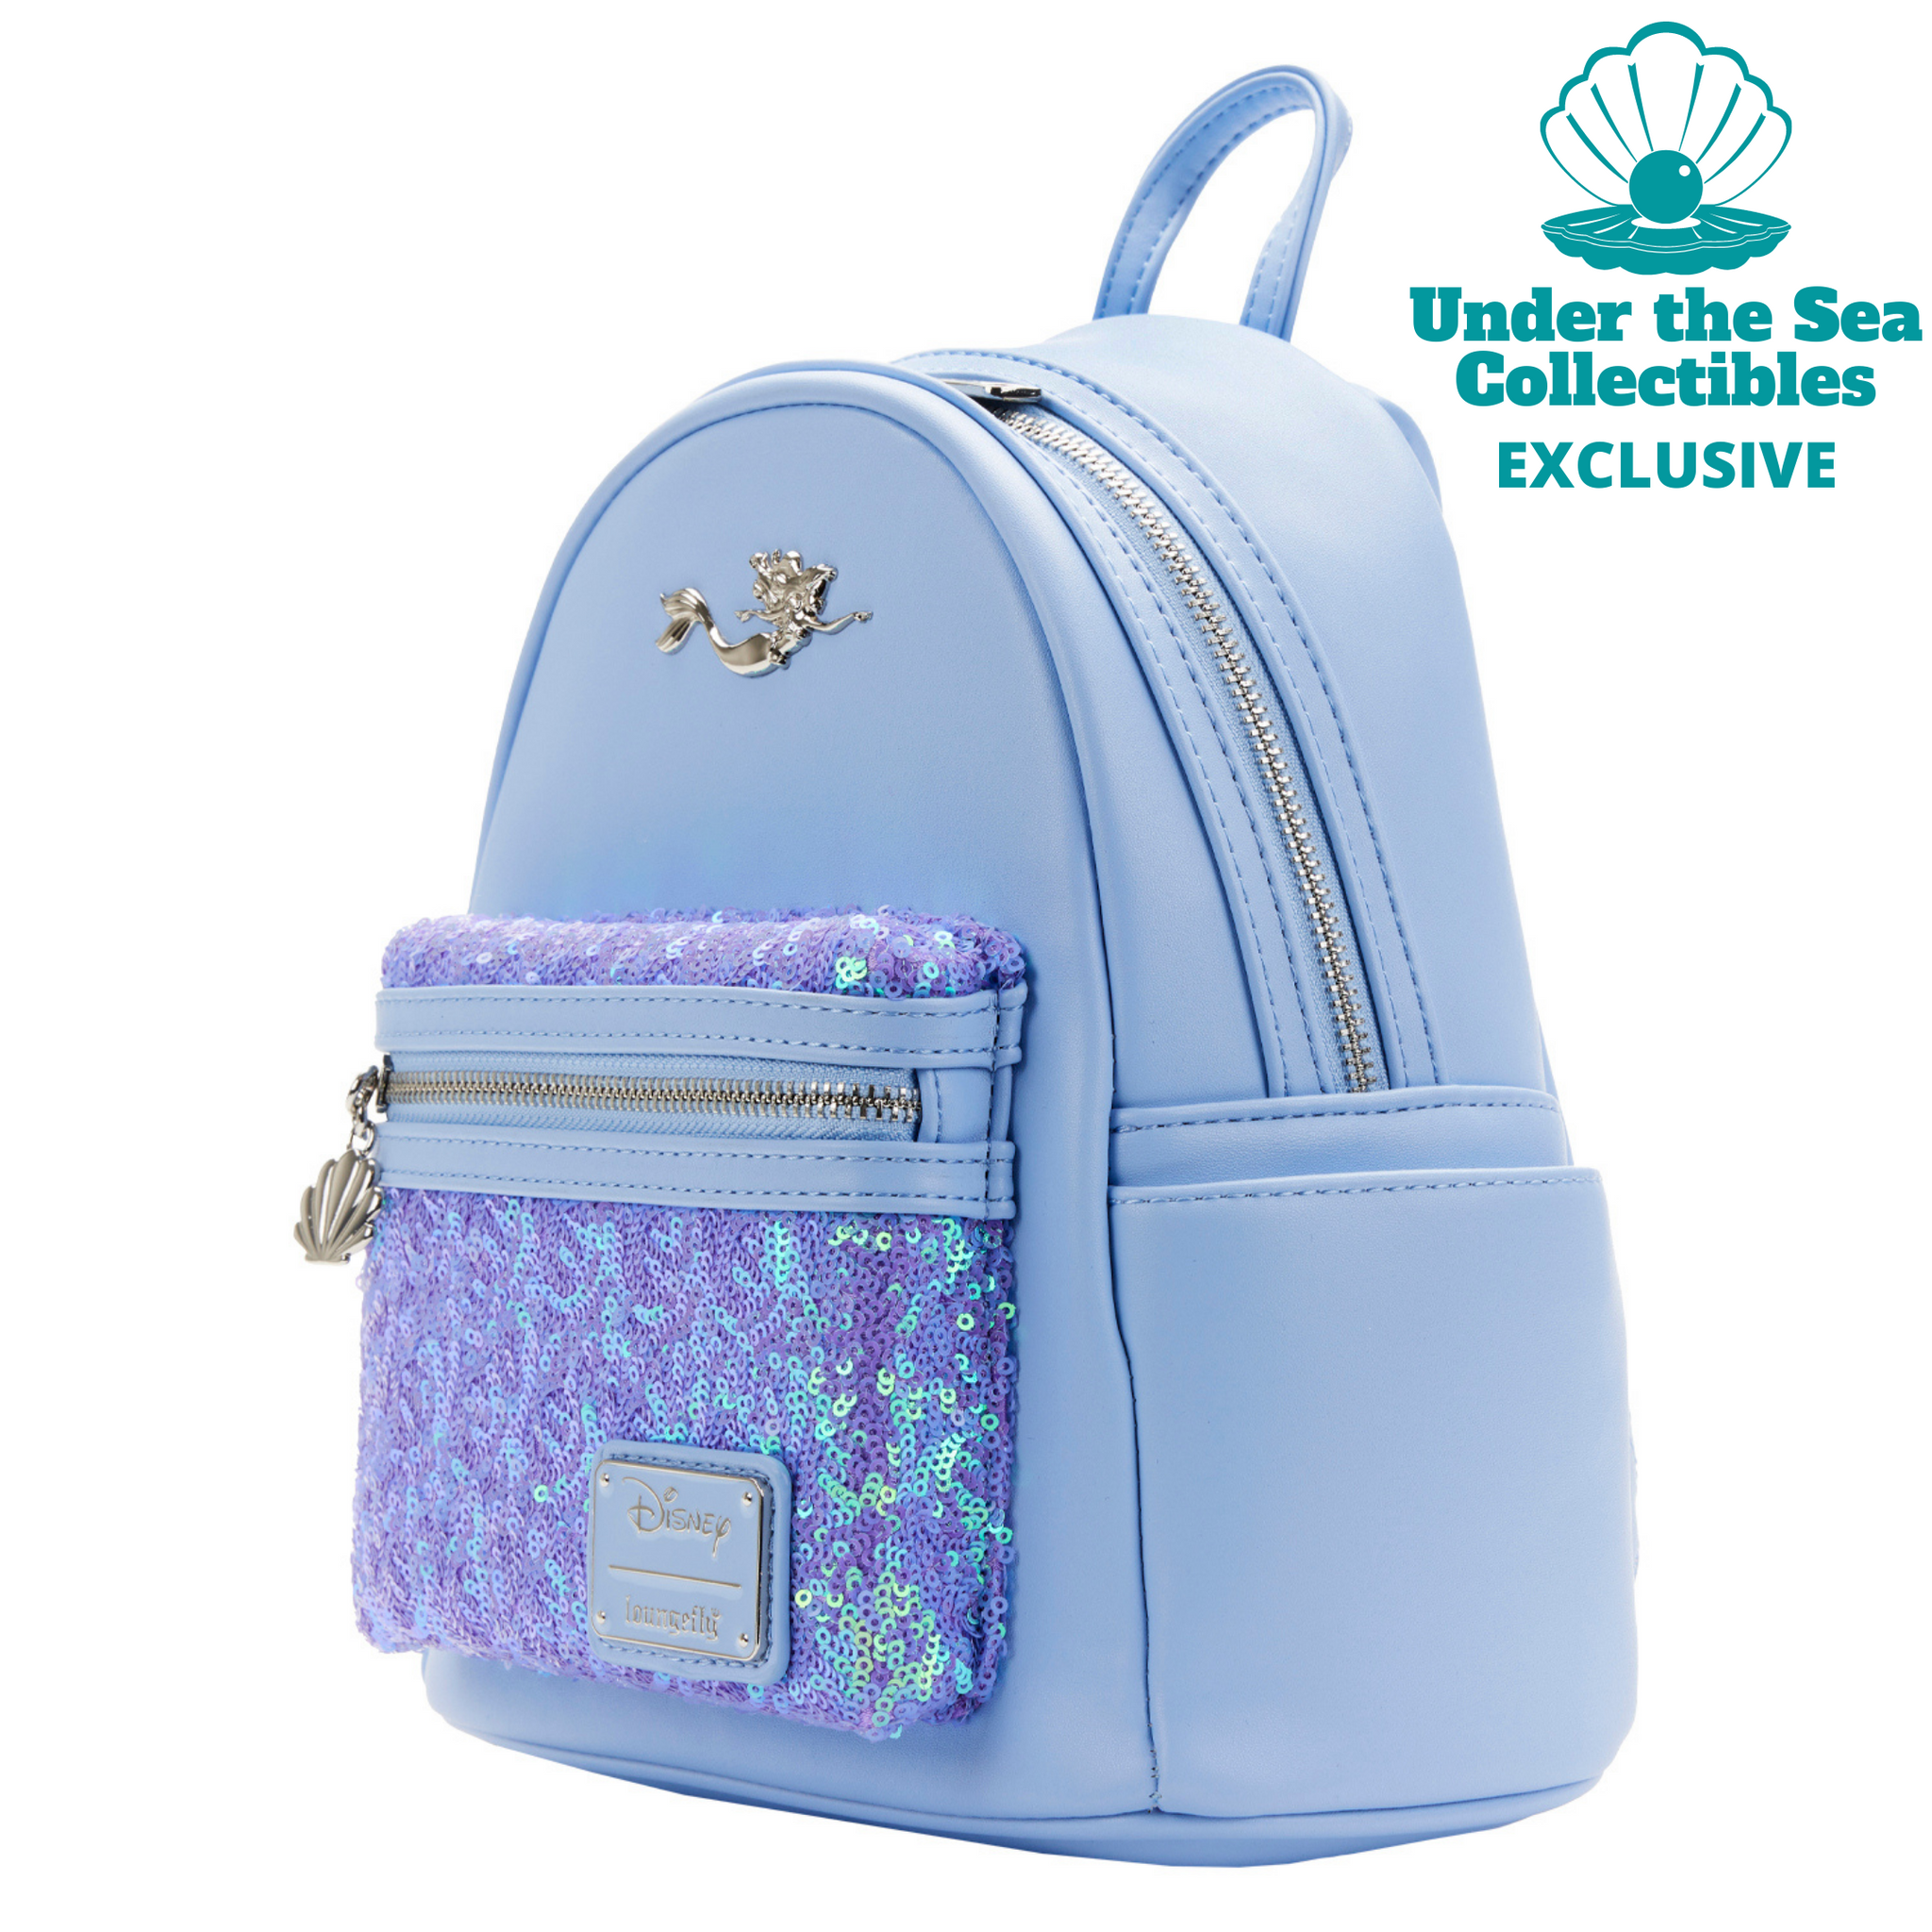 The Little Mermaid Ariel Sequined Mini Backpack - Loungefly REVIEW